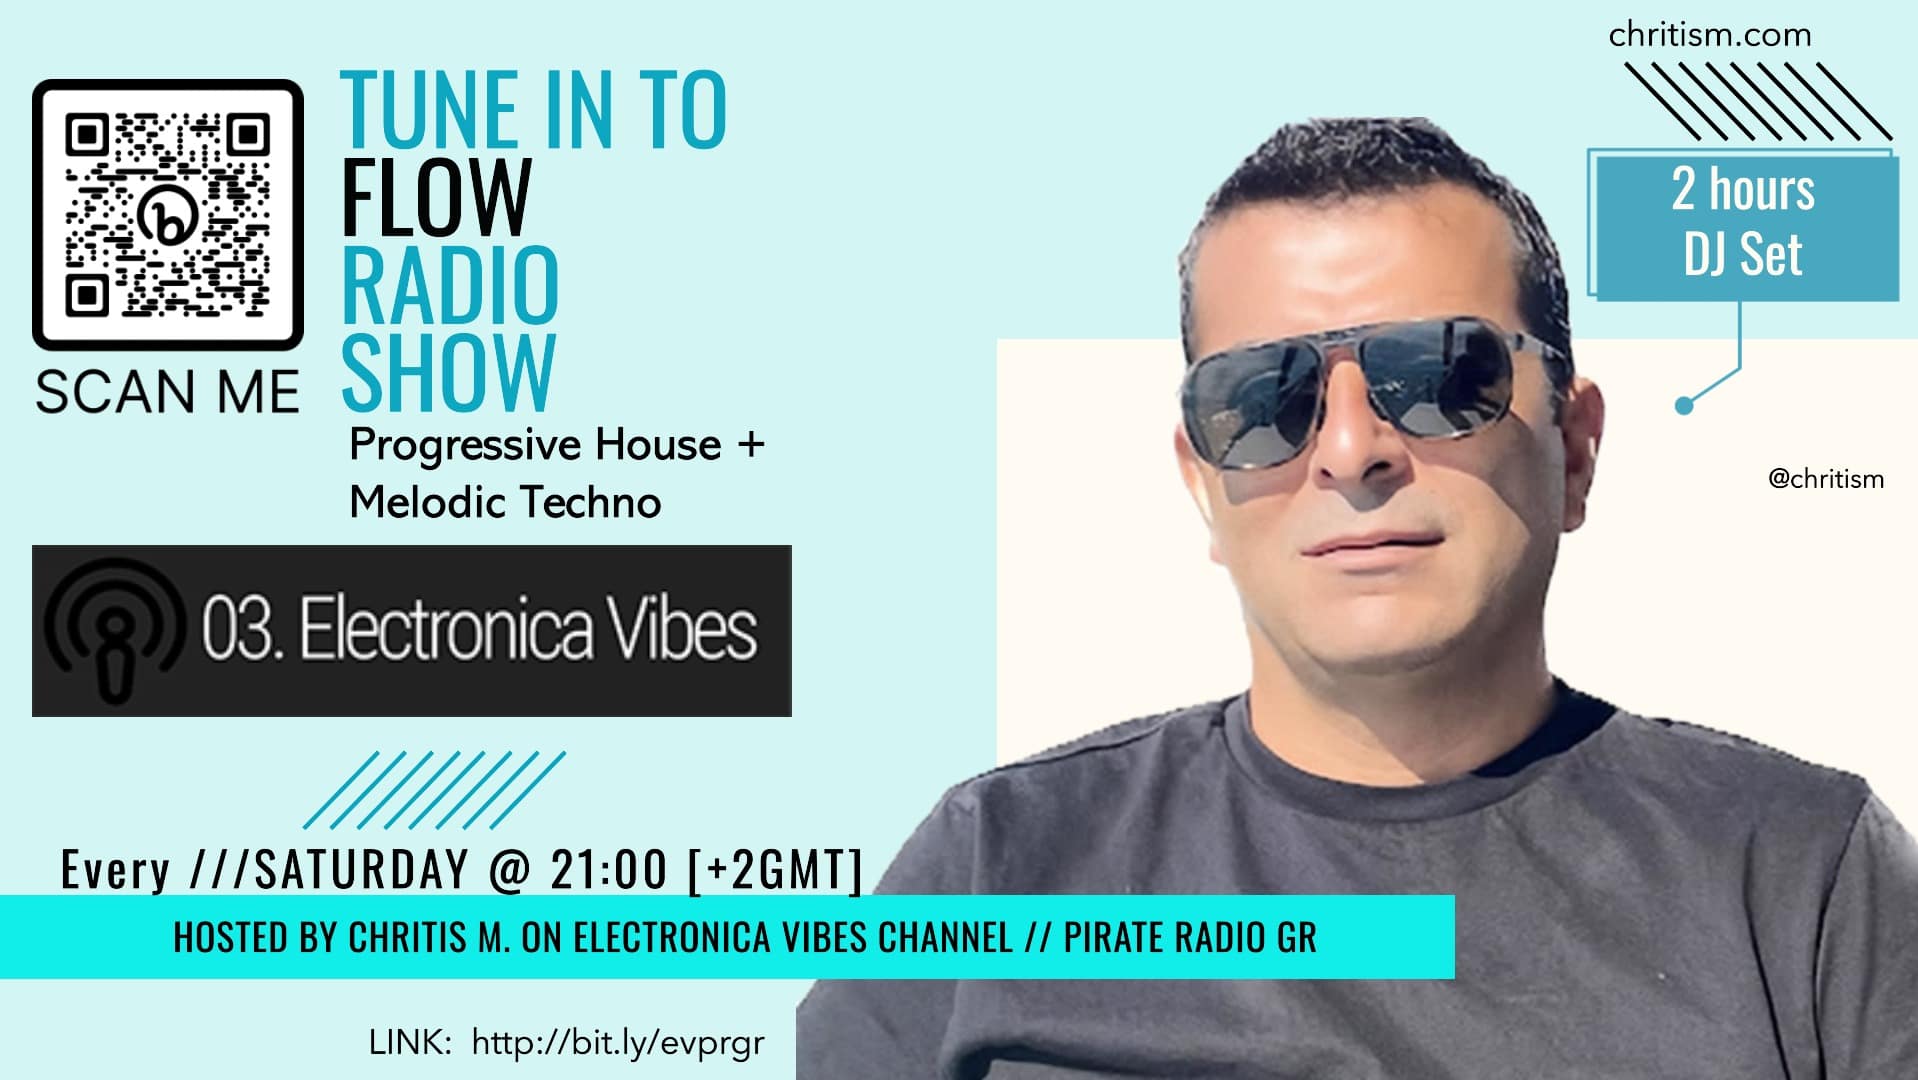 FLOW Radio Show Hosted EVERY SATURDAY by Chritis M. on Electronica Vibes # Pirate Radio GR